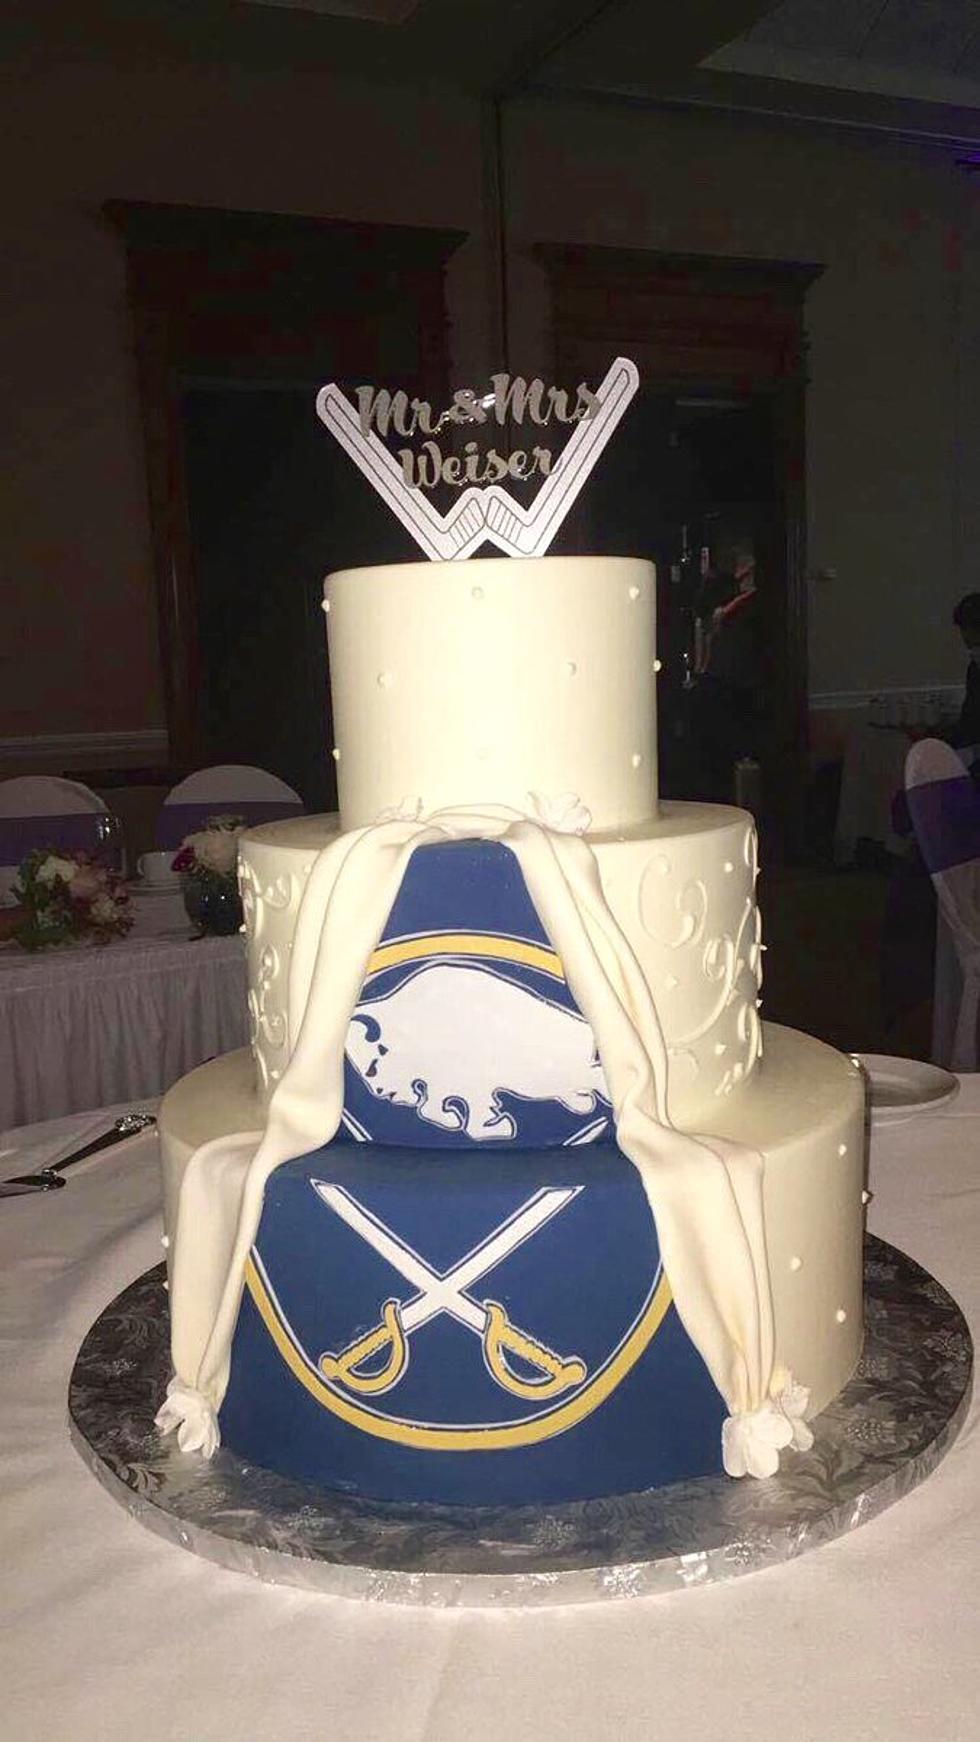 Best Buffalo-Themed Wedding Cake Ever? [PICTURE]